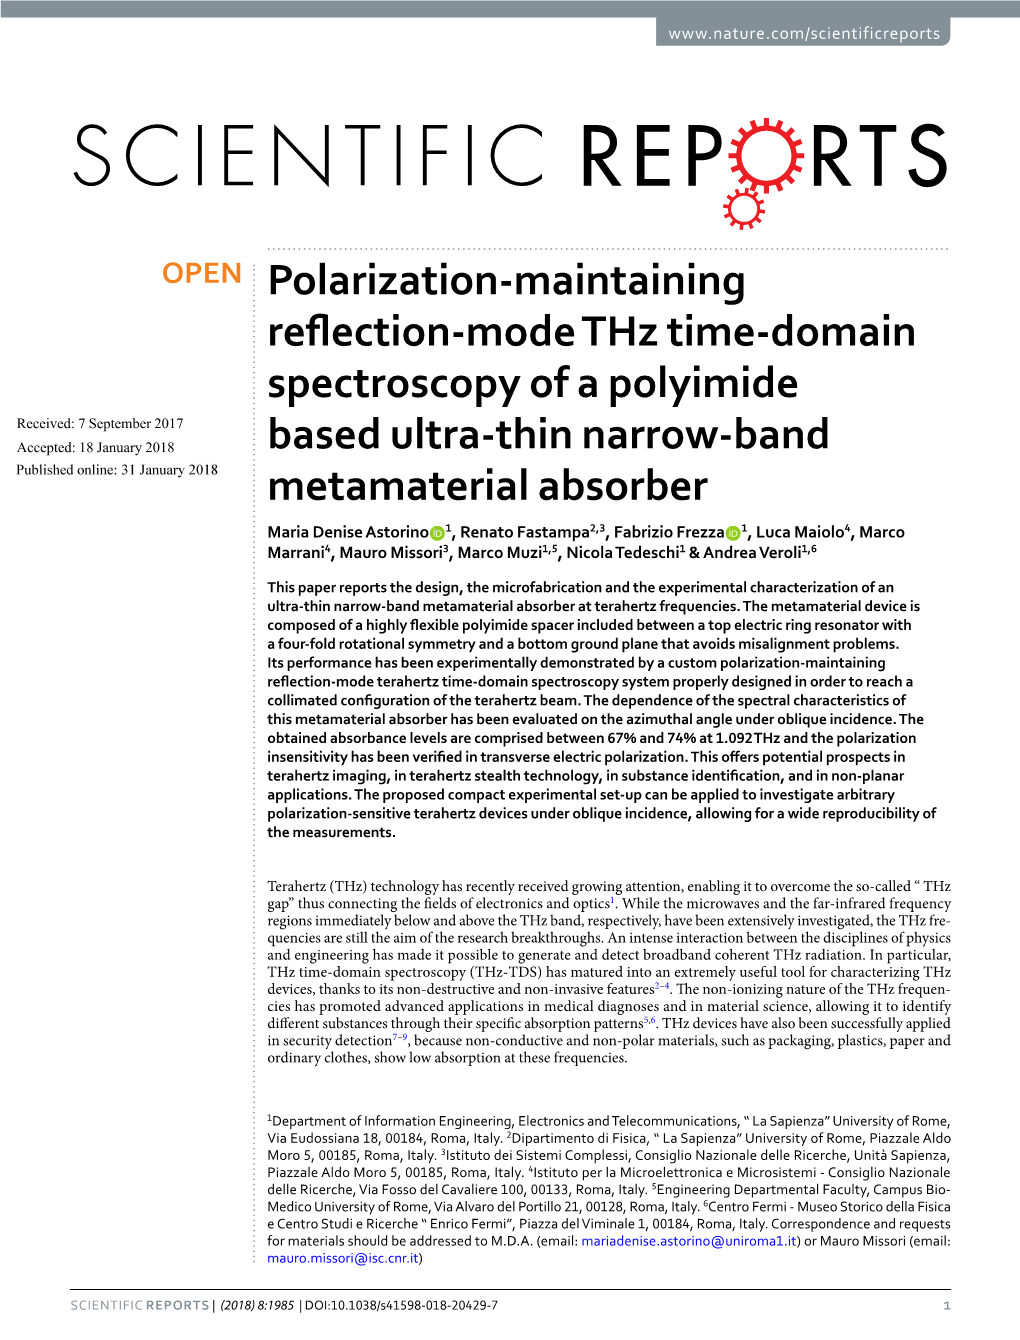 Polarization-Maintaining Reflection-Mode Thz Time-Domain Spectroscopy of a Polyimide Based Ultra-Thin Narrow-Band Metamaterial A